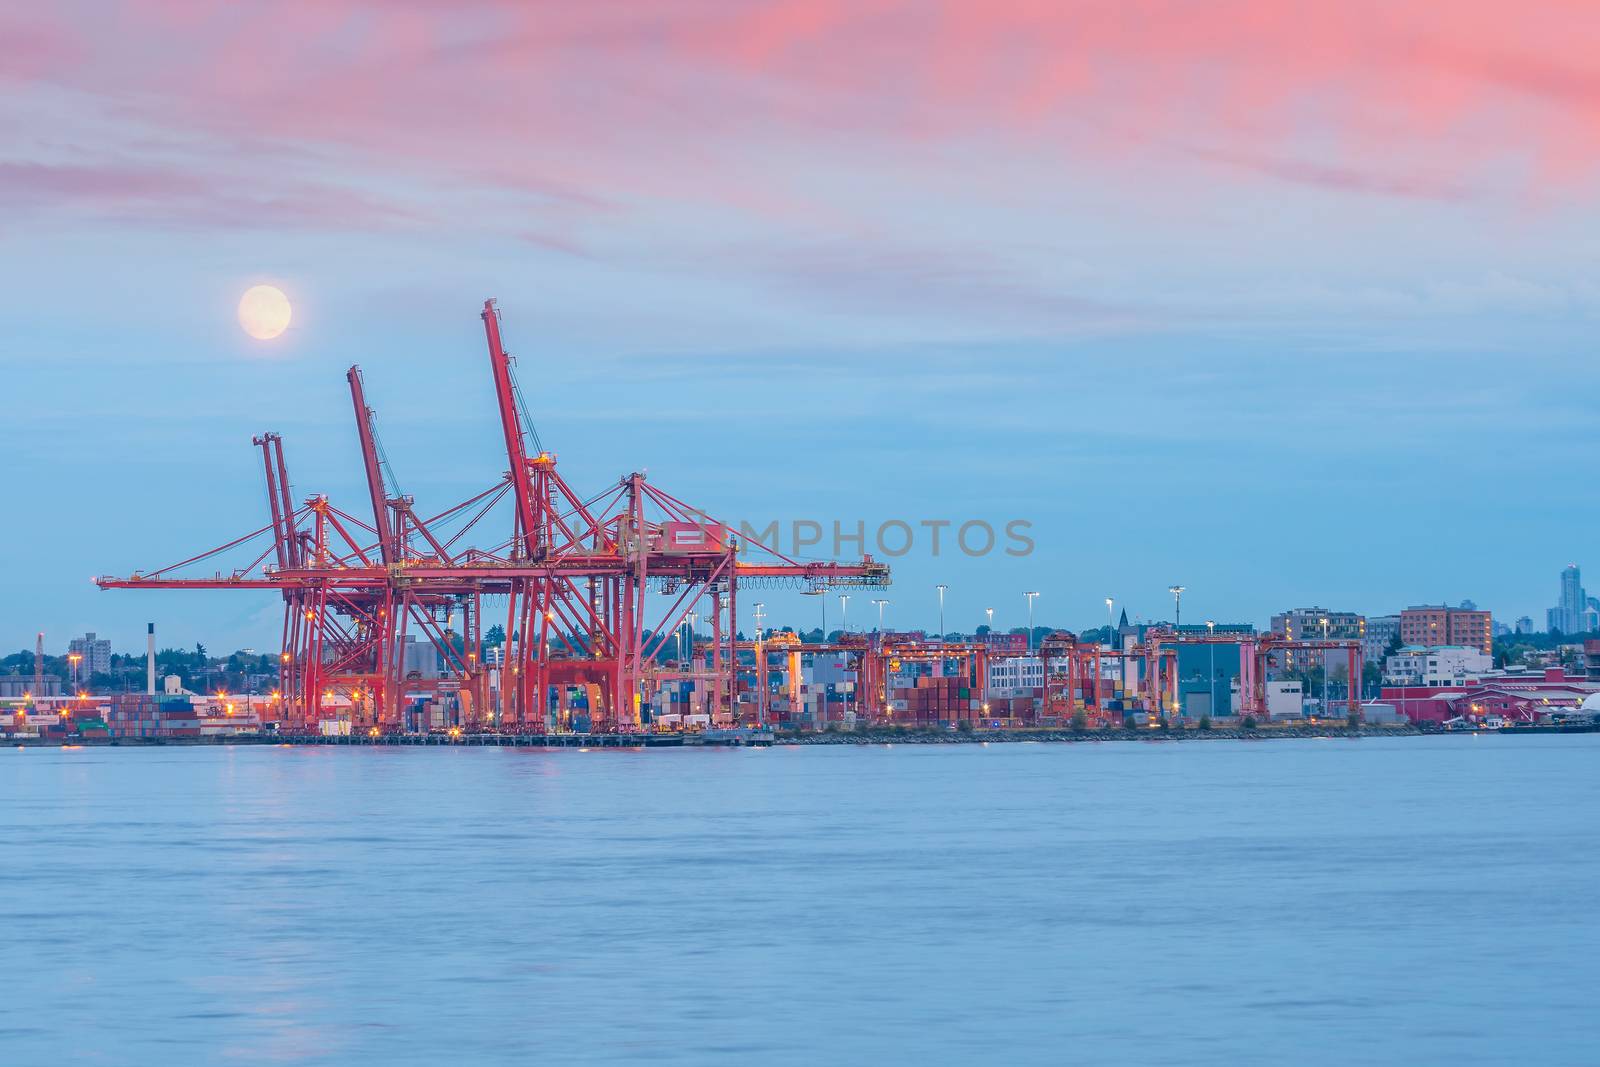 Vancouver Port with hundreds of shipping containers at night